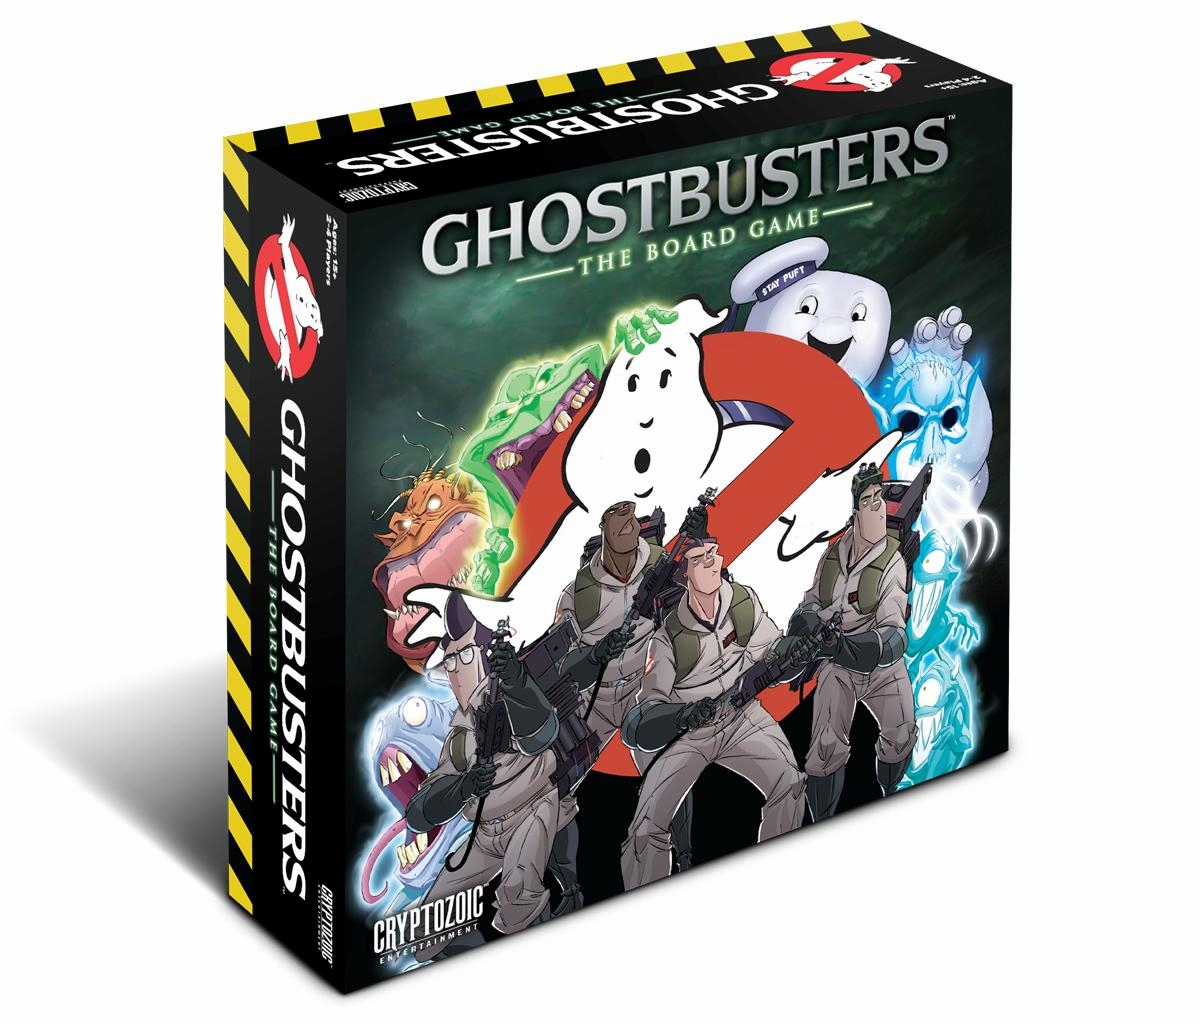 kickstarter-for-ghostbusters-the-board-game-from-cryptozoic-021015-005.jpg